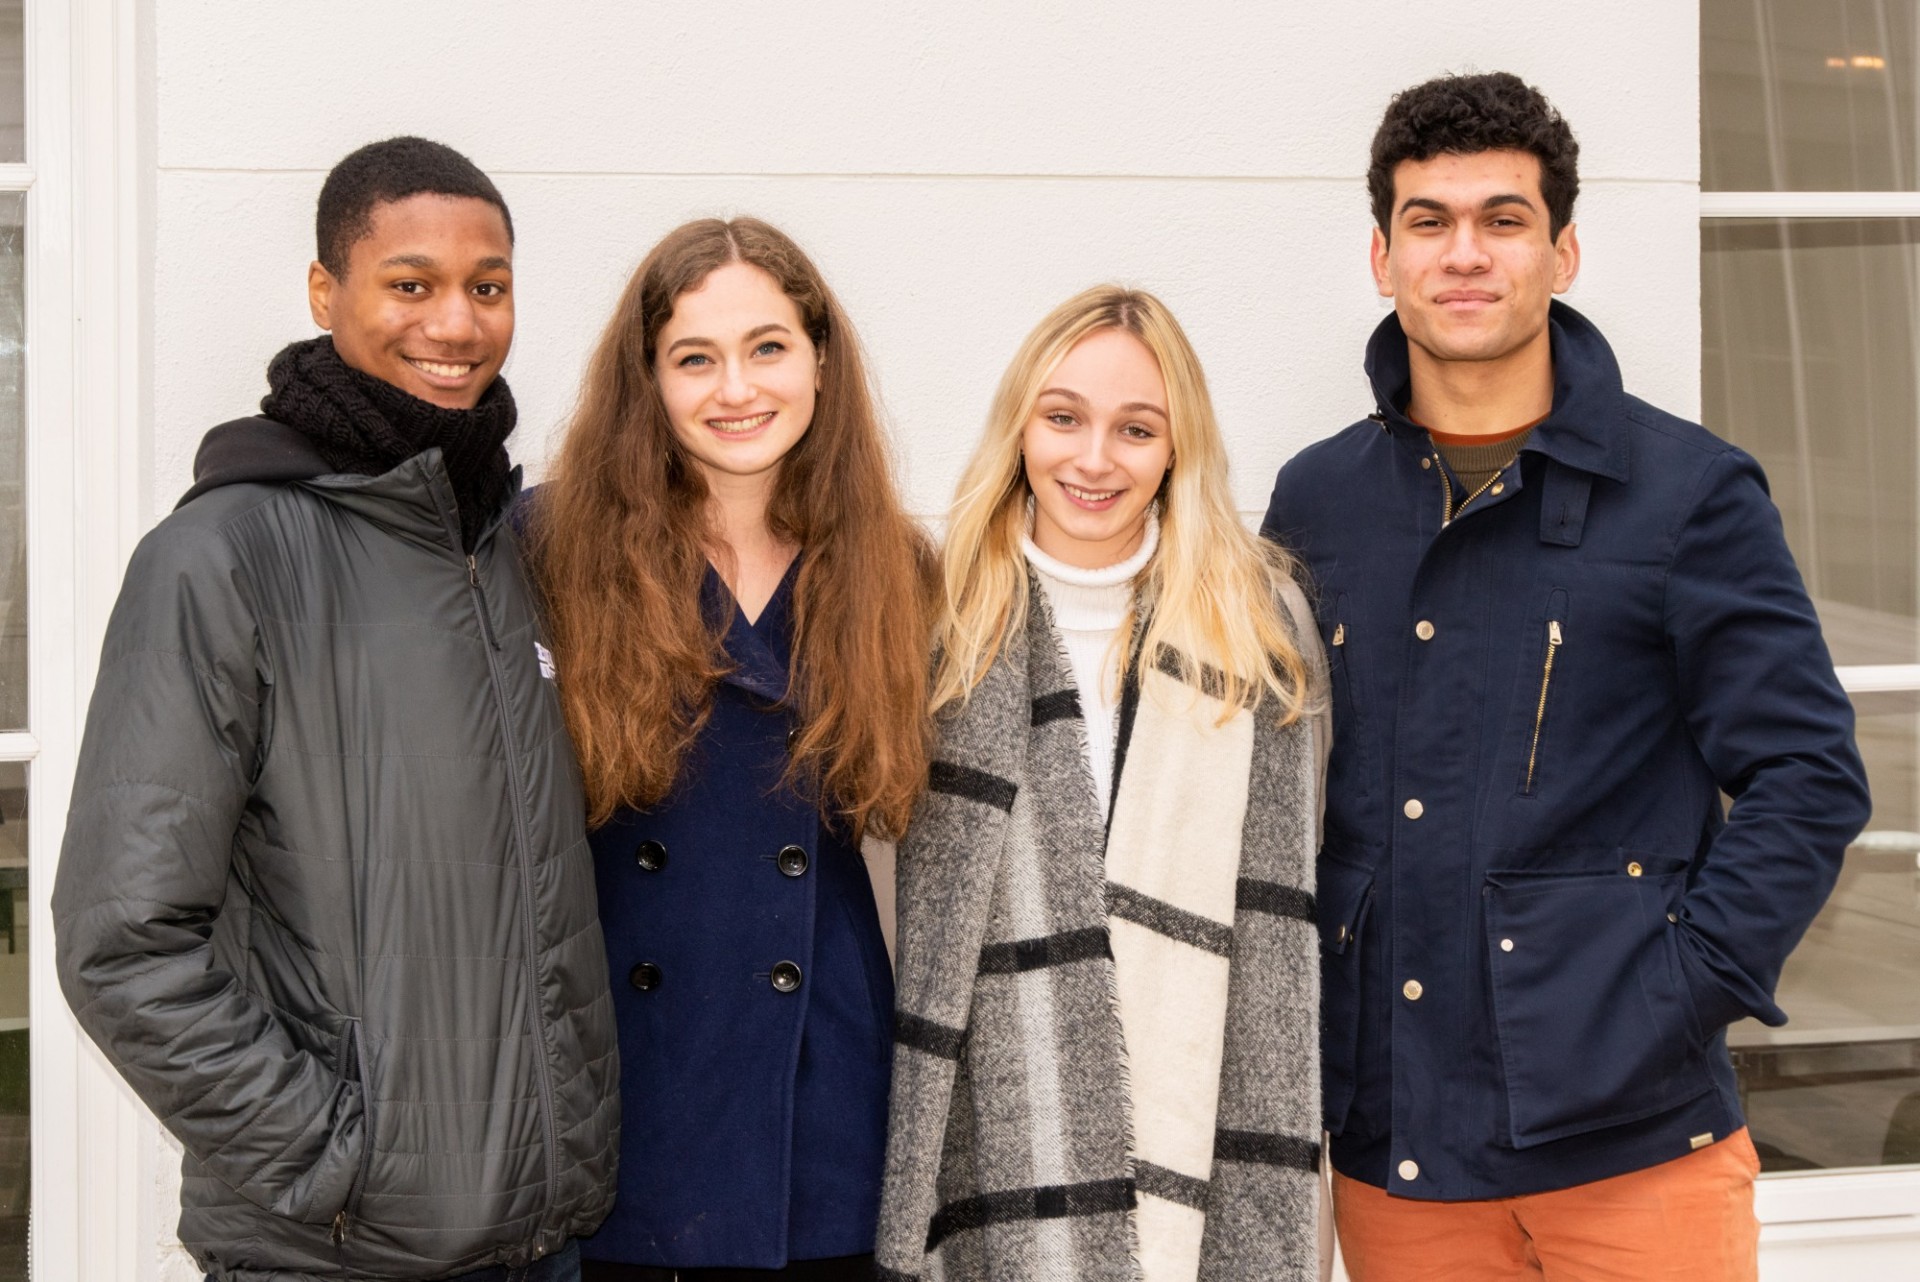 Students in the Columbia in Paris program, Spring 2020